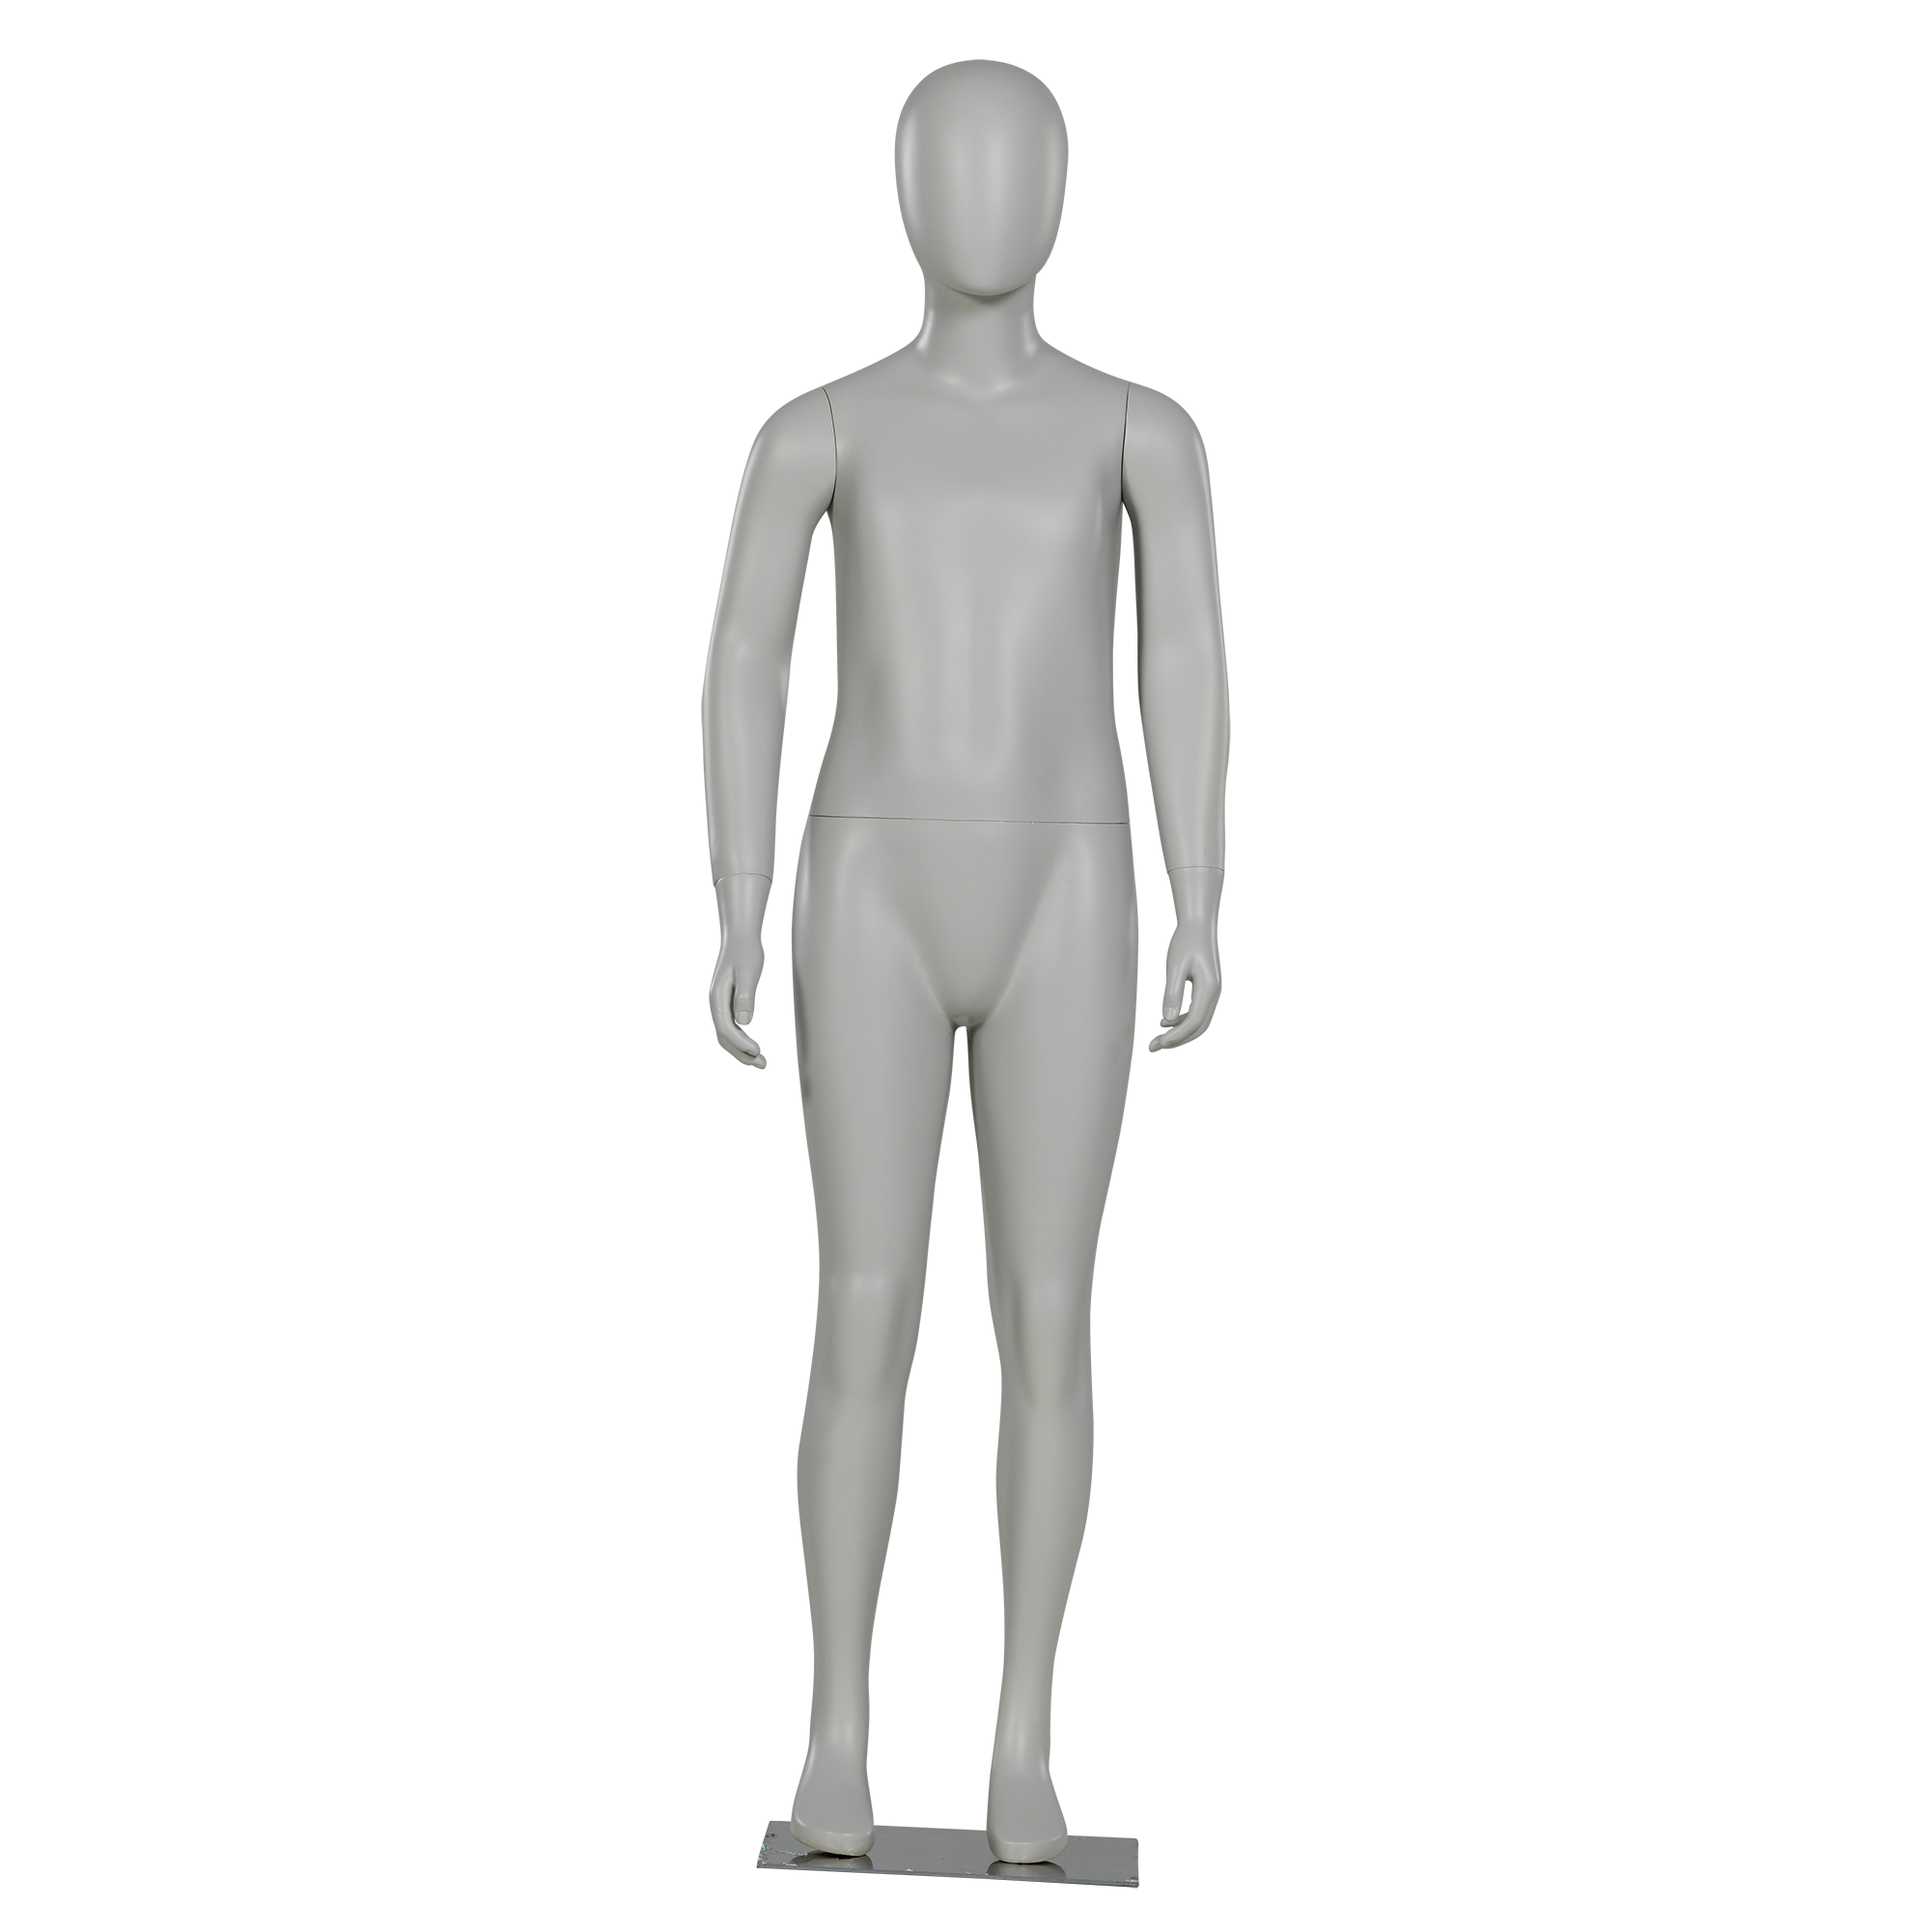 Realistic Standing Child Mannequin